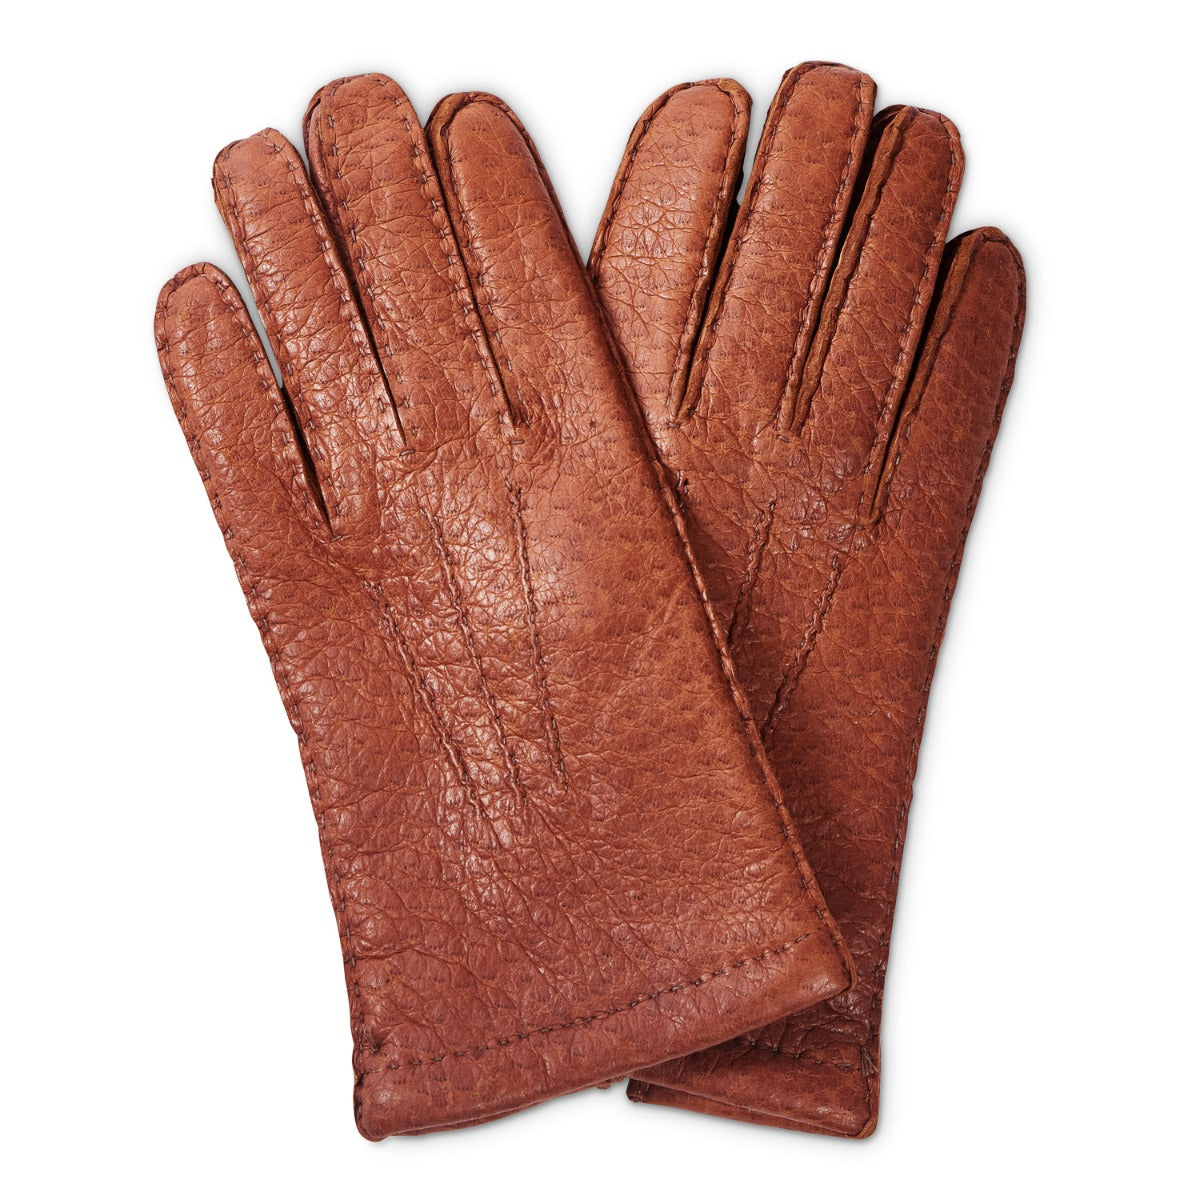 Sovereign Grade Medium Brown Peccary Leather Gloves, Unlined